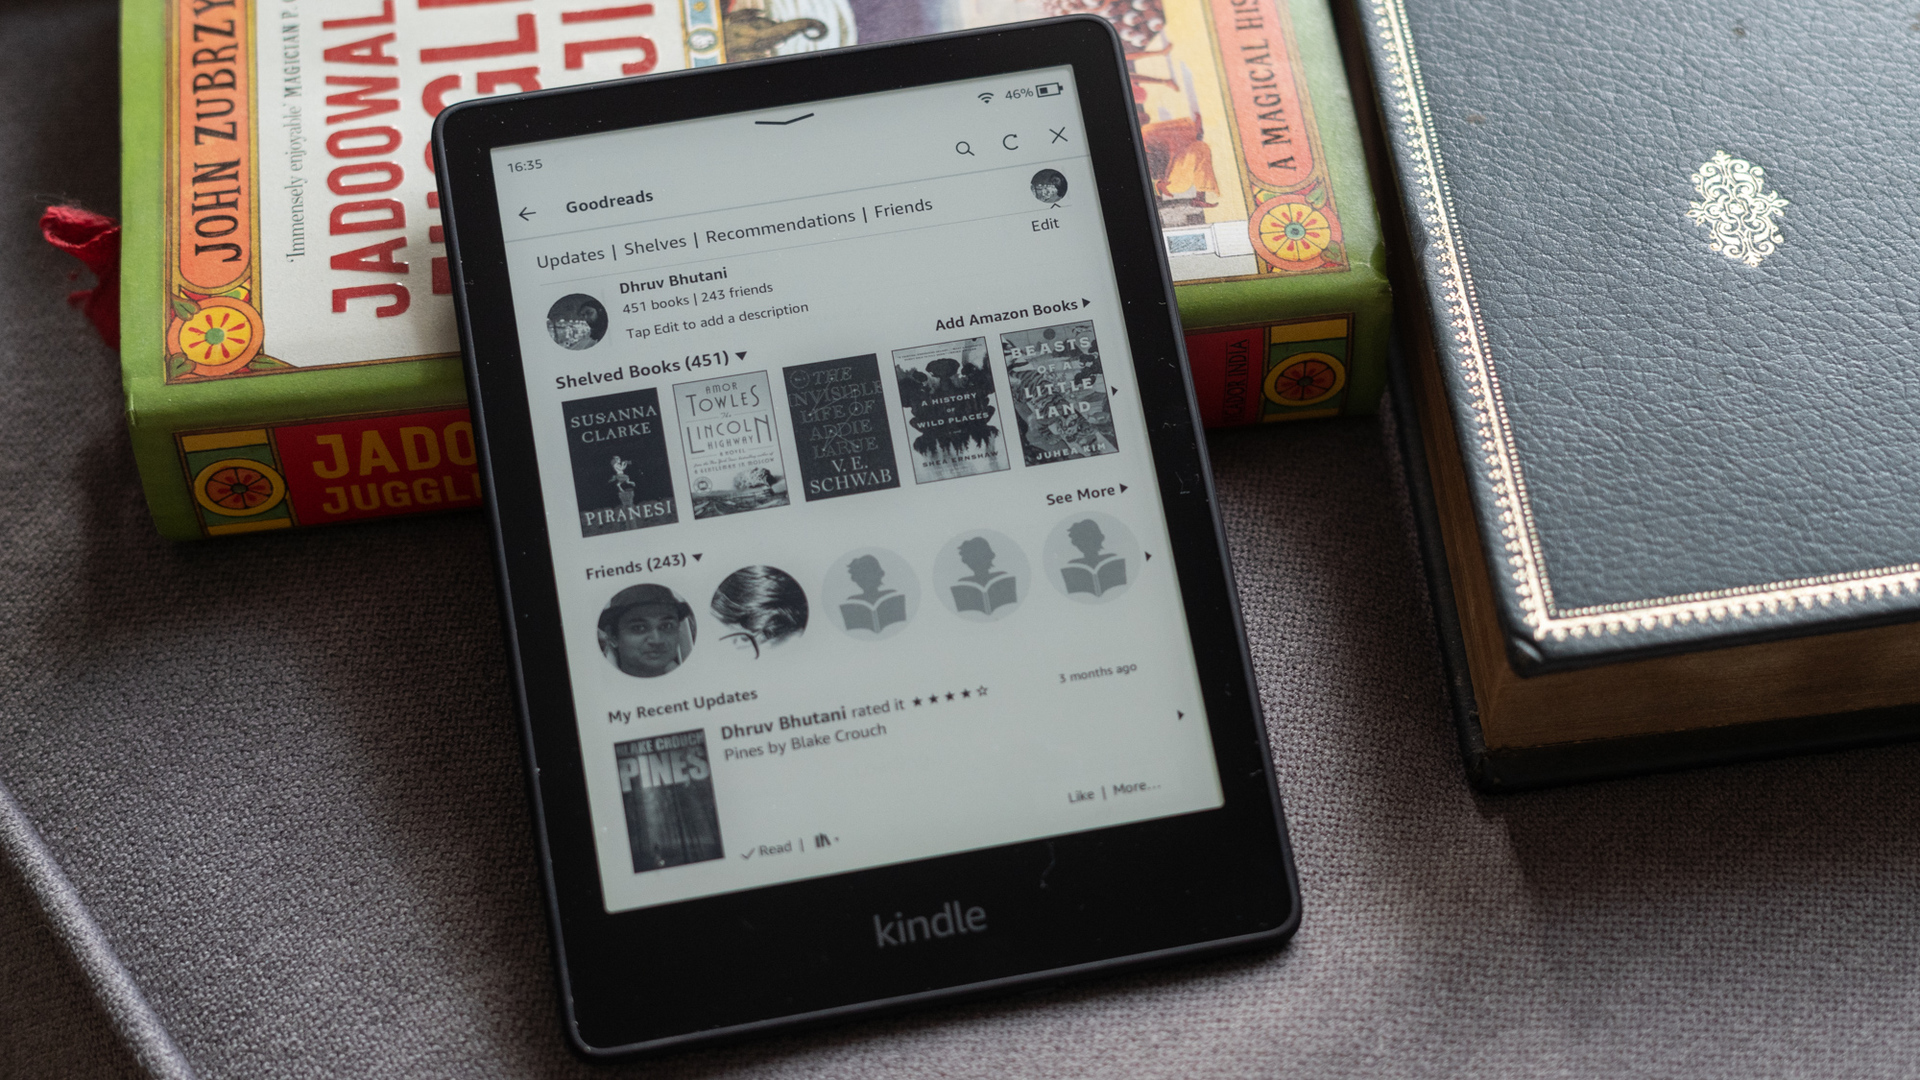 Kindle Paperwhite 2021 homepage for Goodreads on Kindle